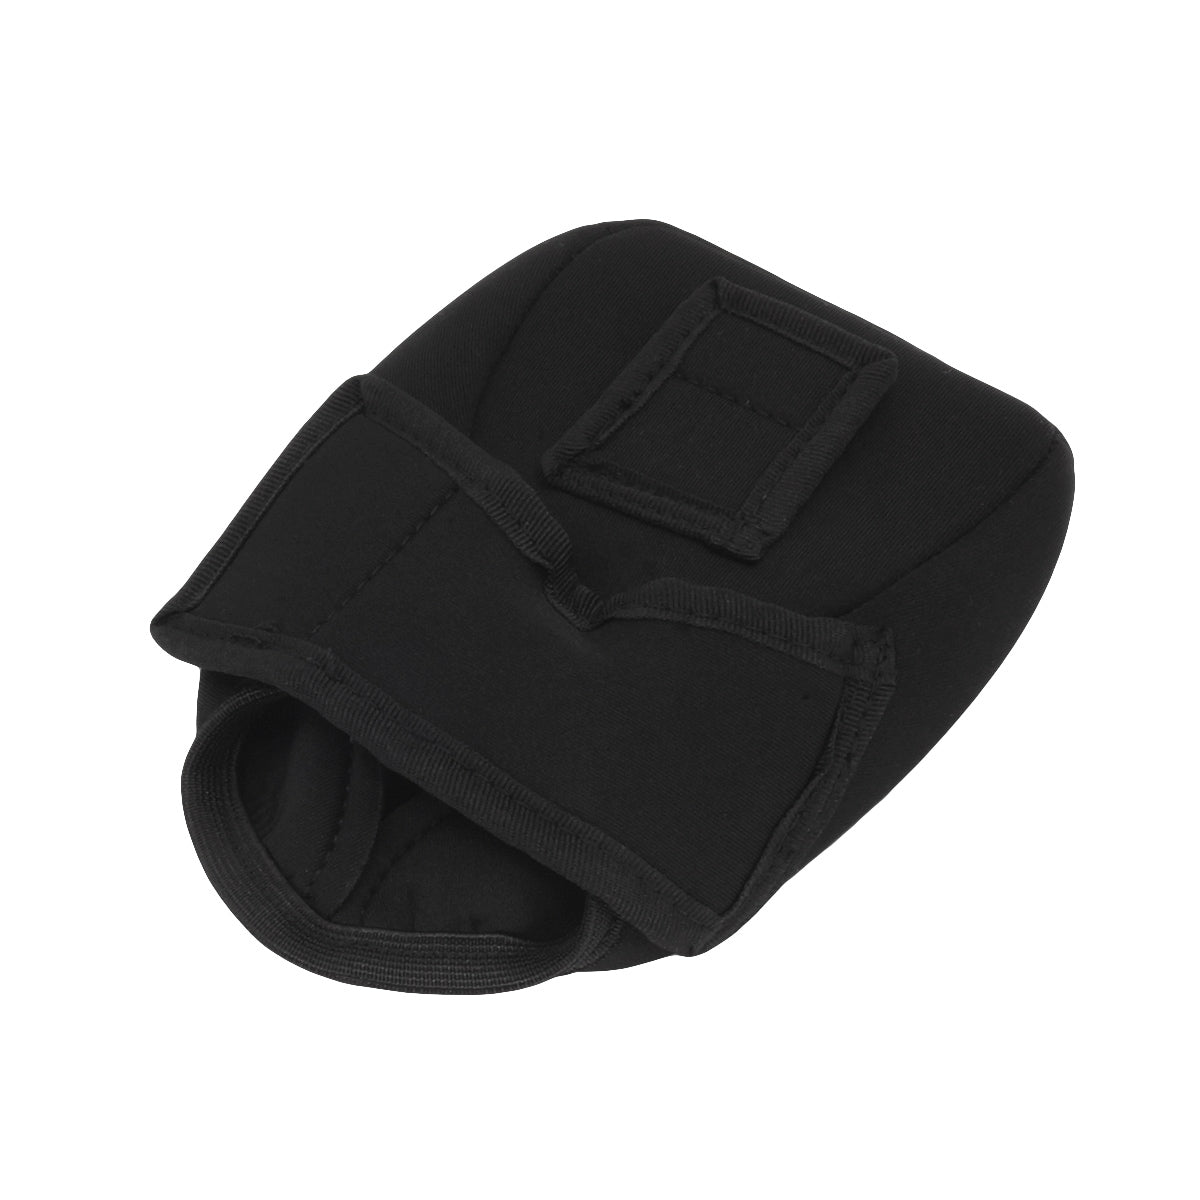 Fisher and Teknetics Elbow Cover for F75, F70 and T2 Metal Detector